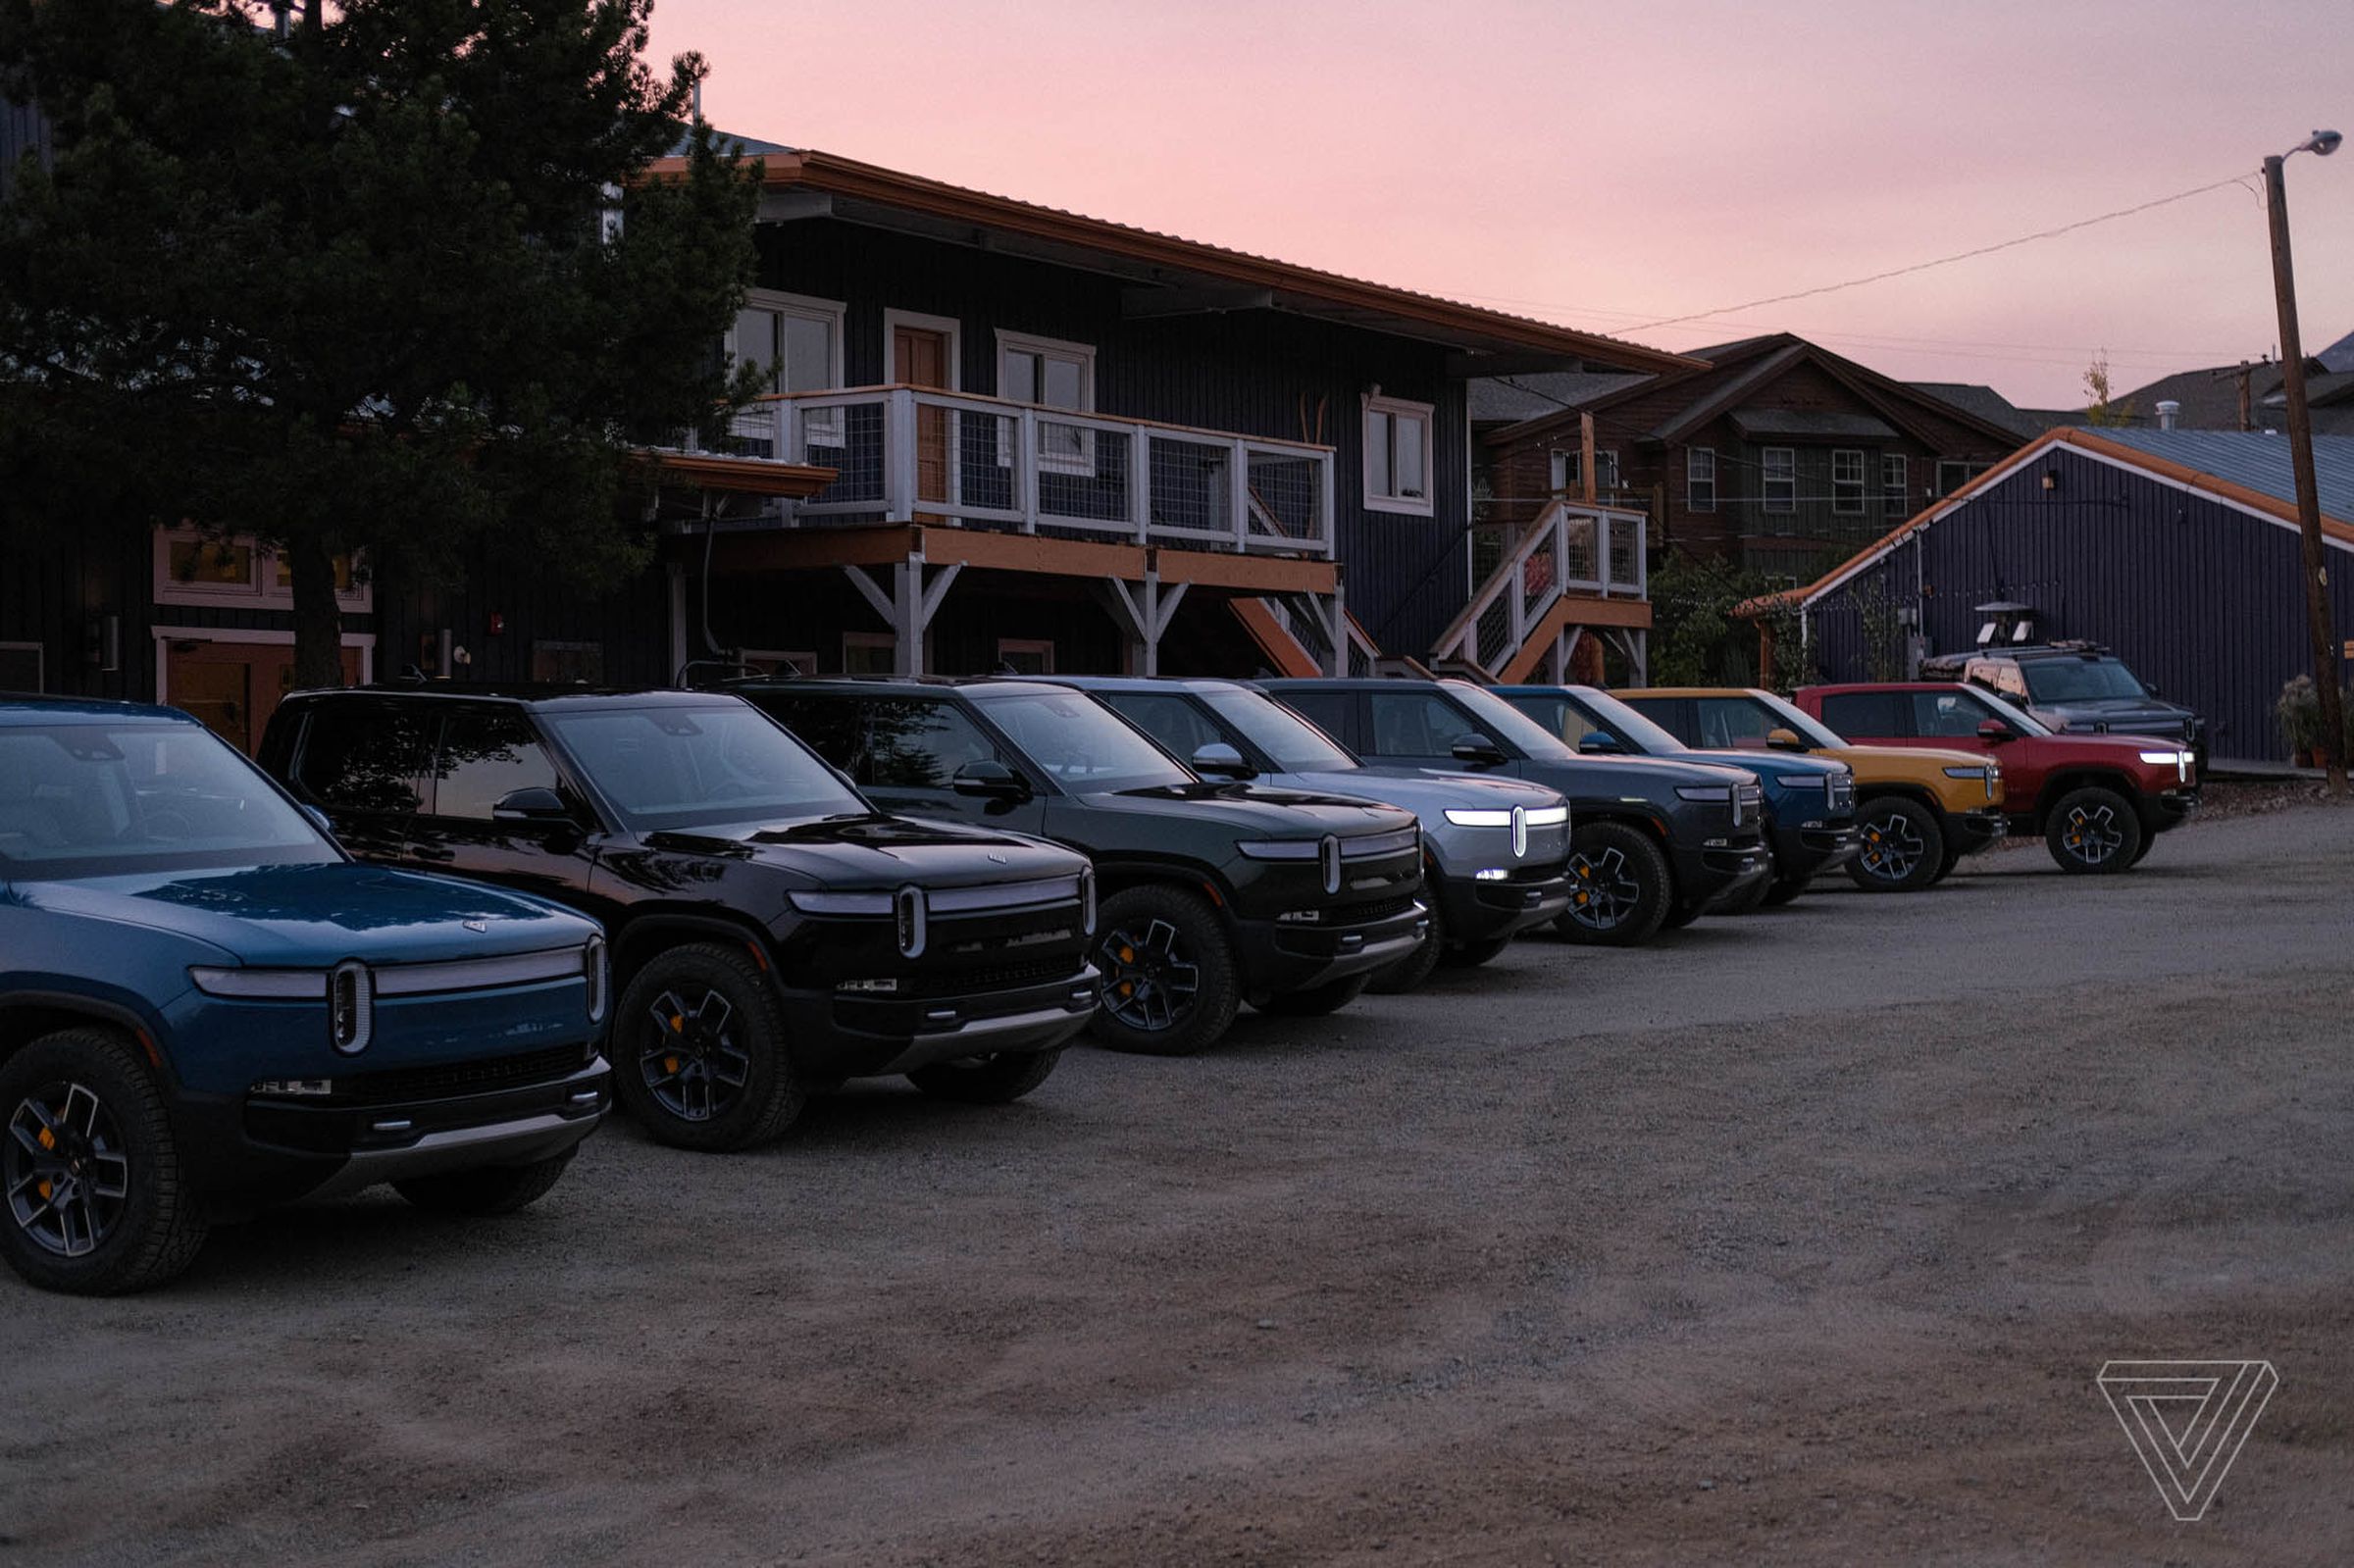 Photo of several Rivian R1Ts parked.